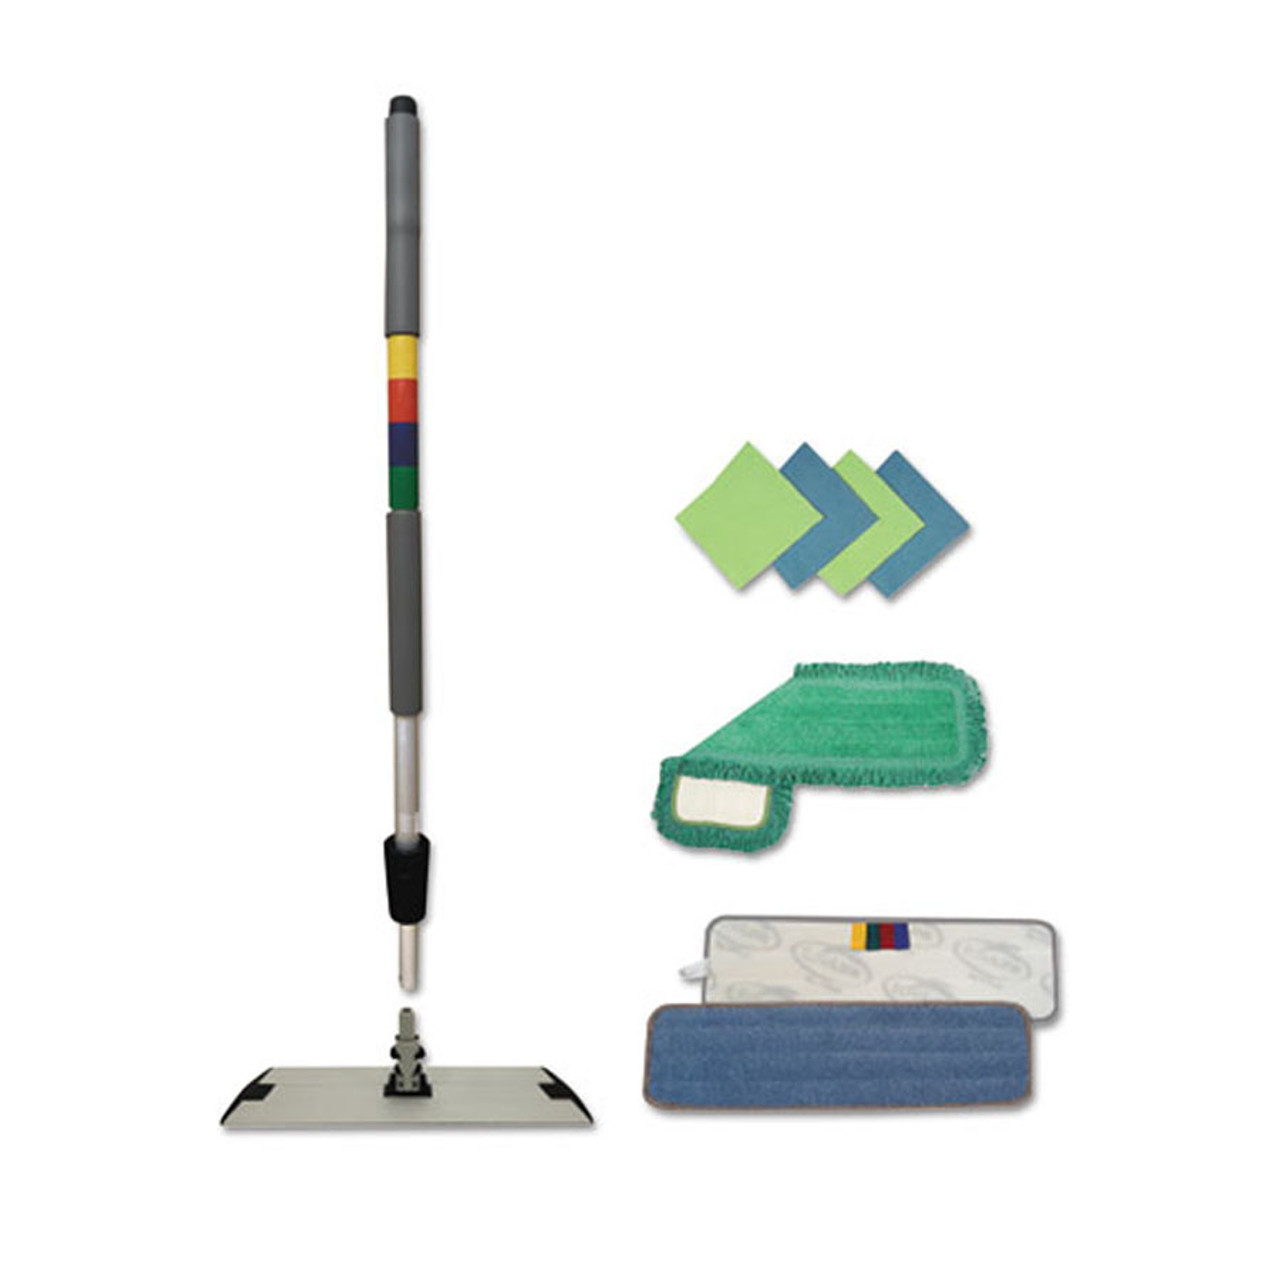 Rubbermaid Commercial Products 18 in. Microfiber Flat Mop Kit